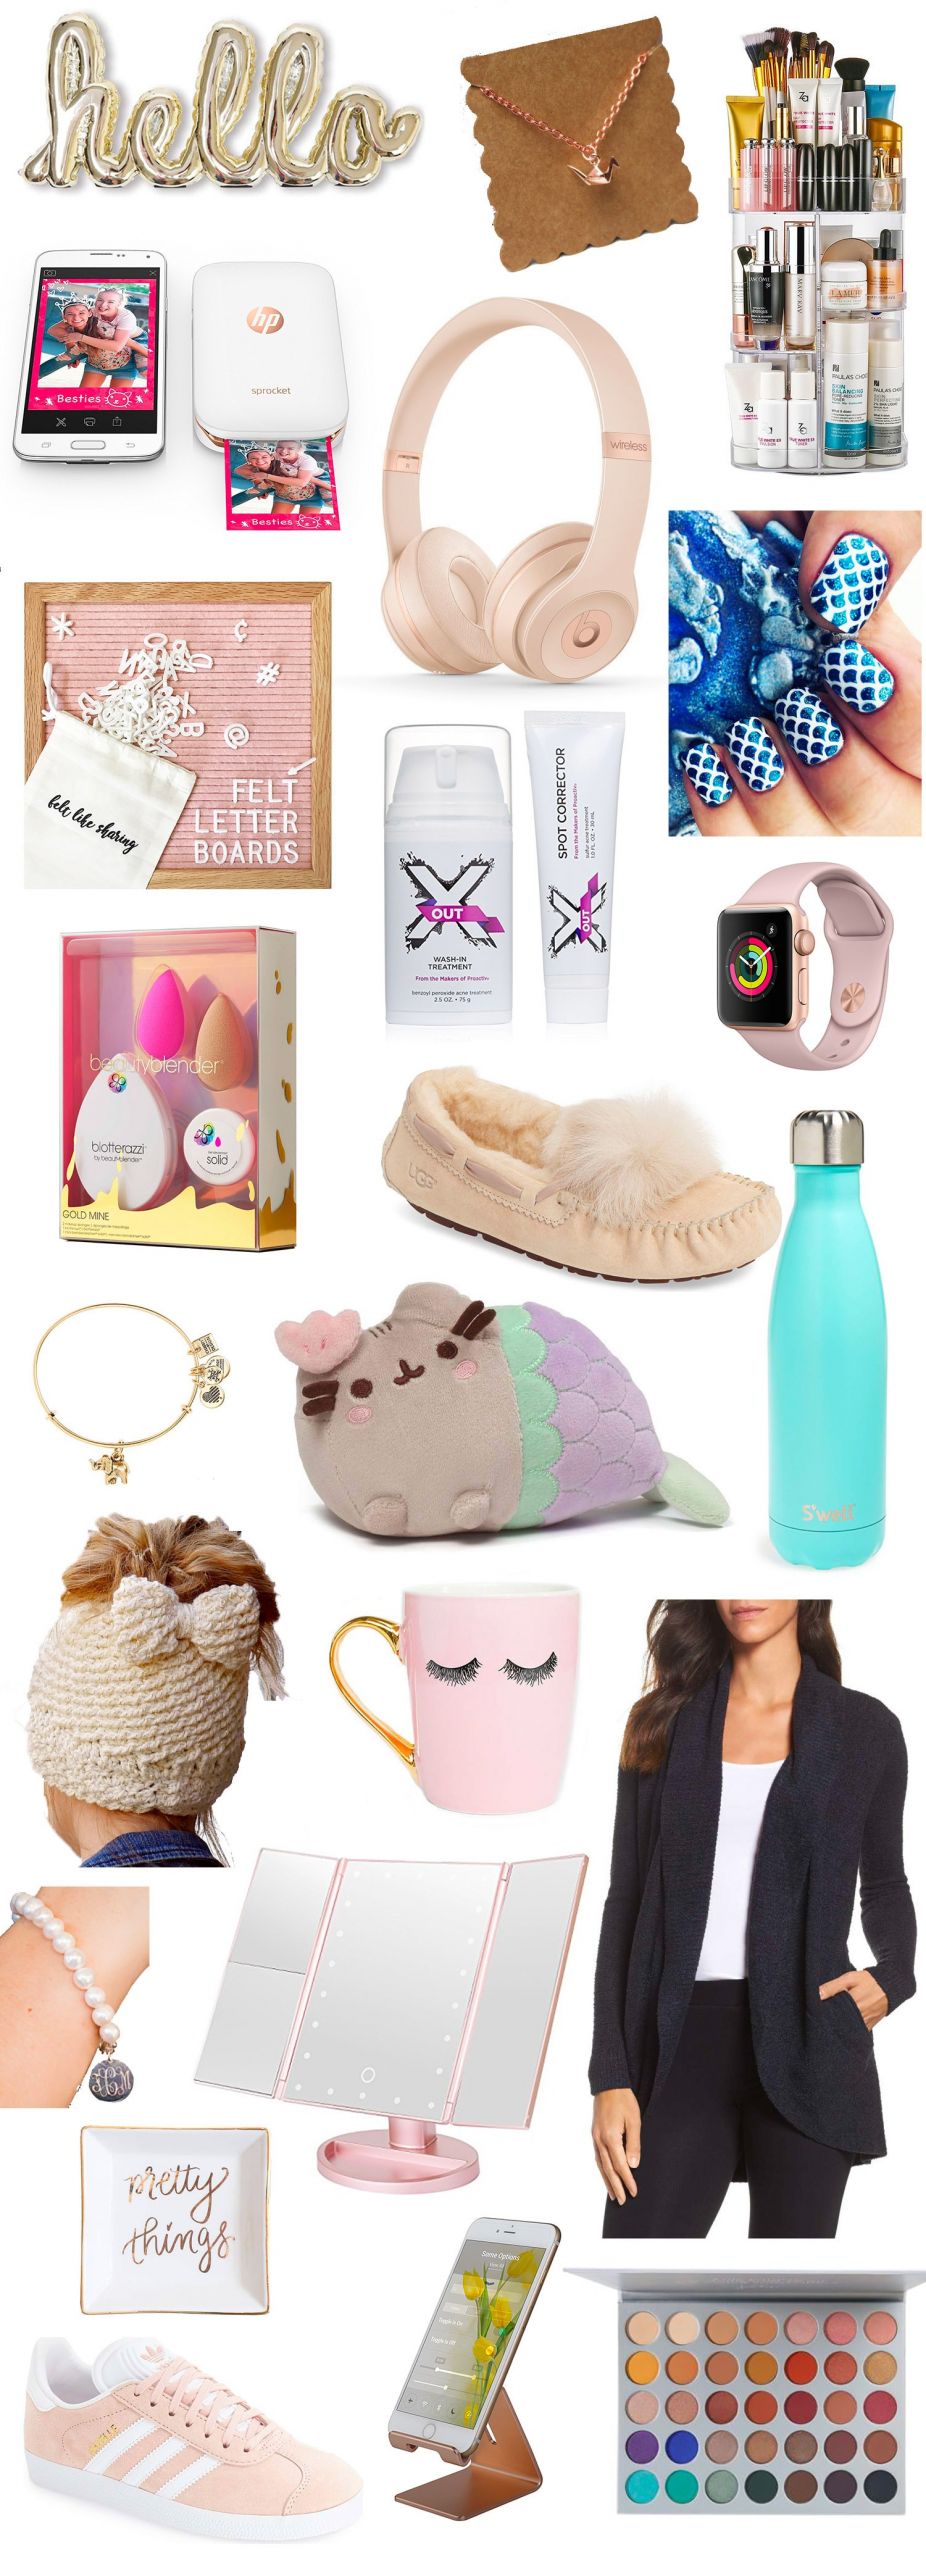 Best Gift Ideas For Girls
 Top Gifts for Teens This Christmas